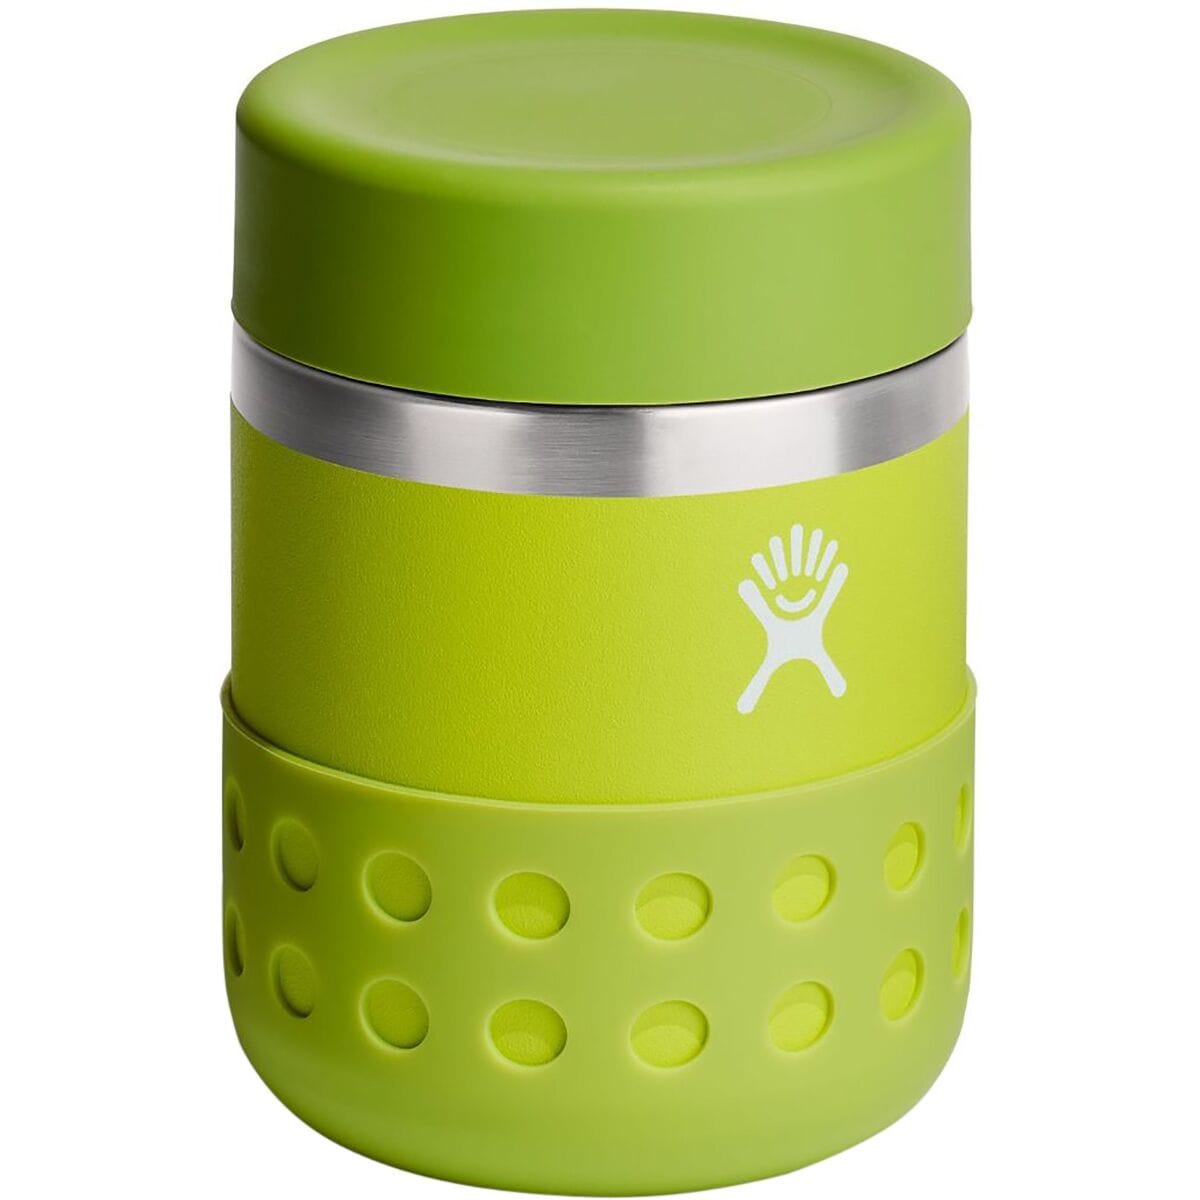  Hydro Flask 12 oz. Kids Insulated Food Jar - Stainless Steel  with Leak Proof Cap, Honeydew : Home & Kitchen